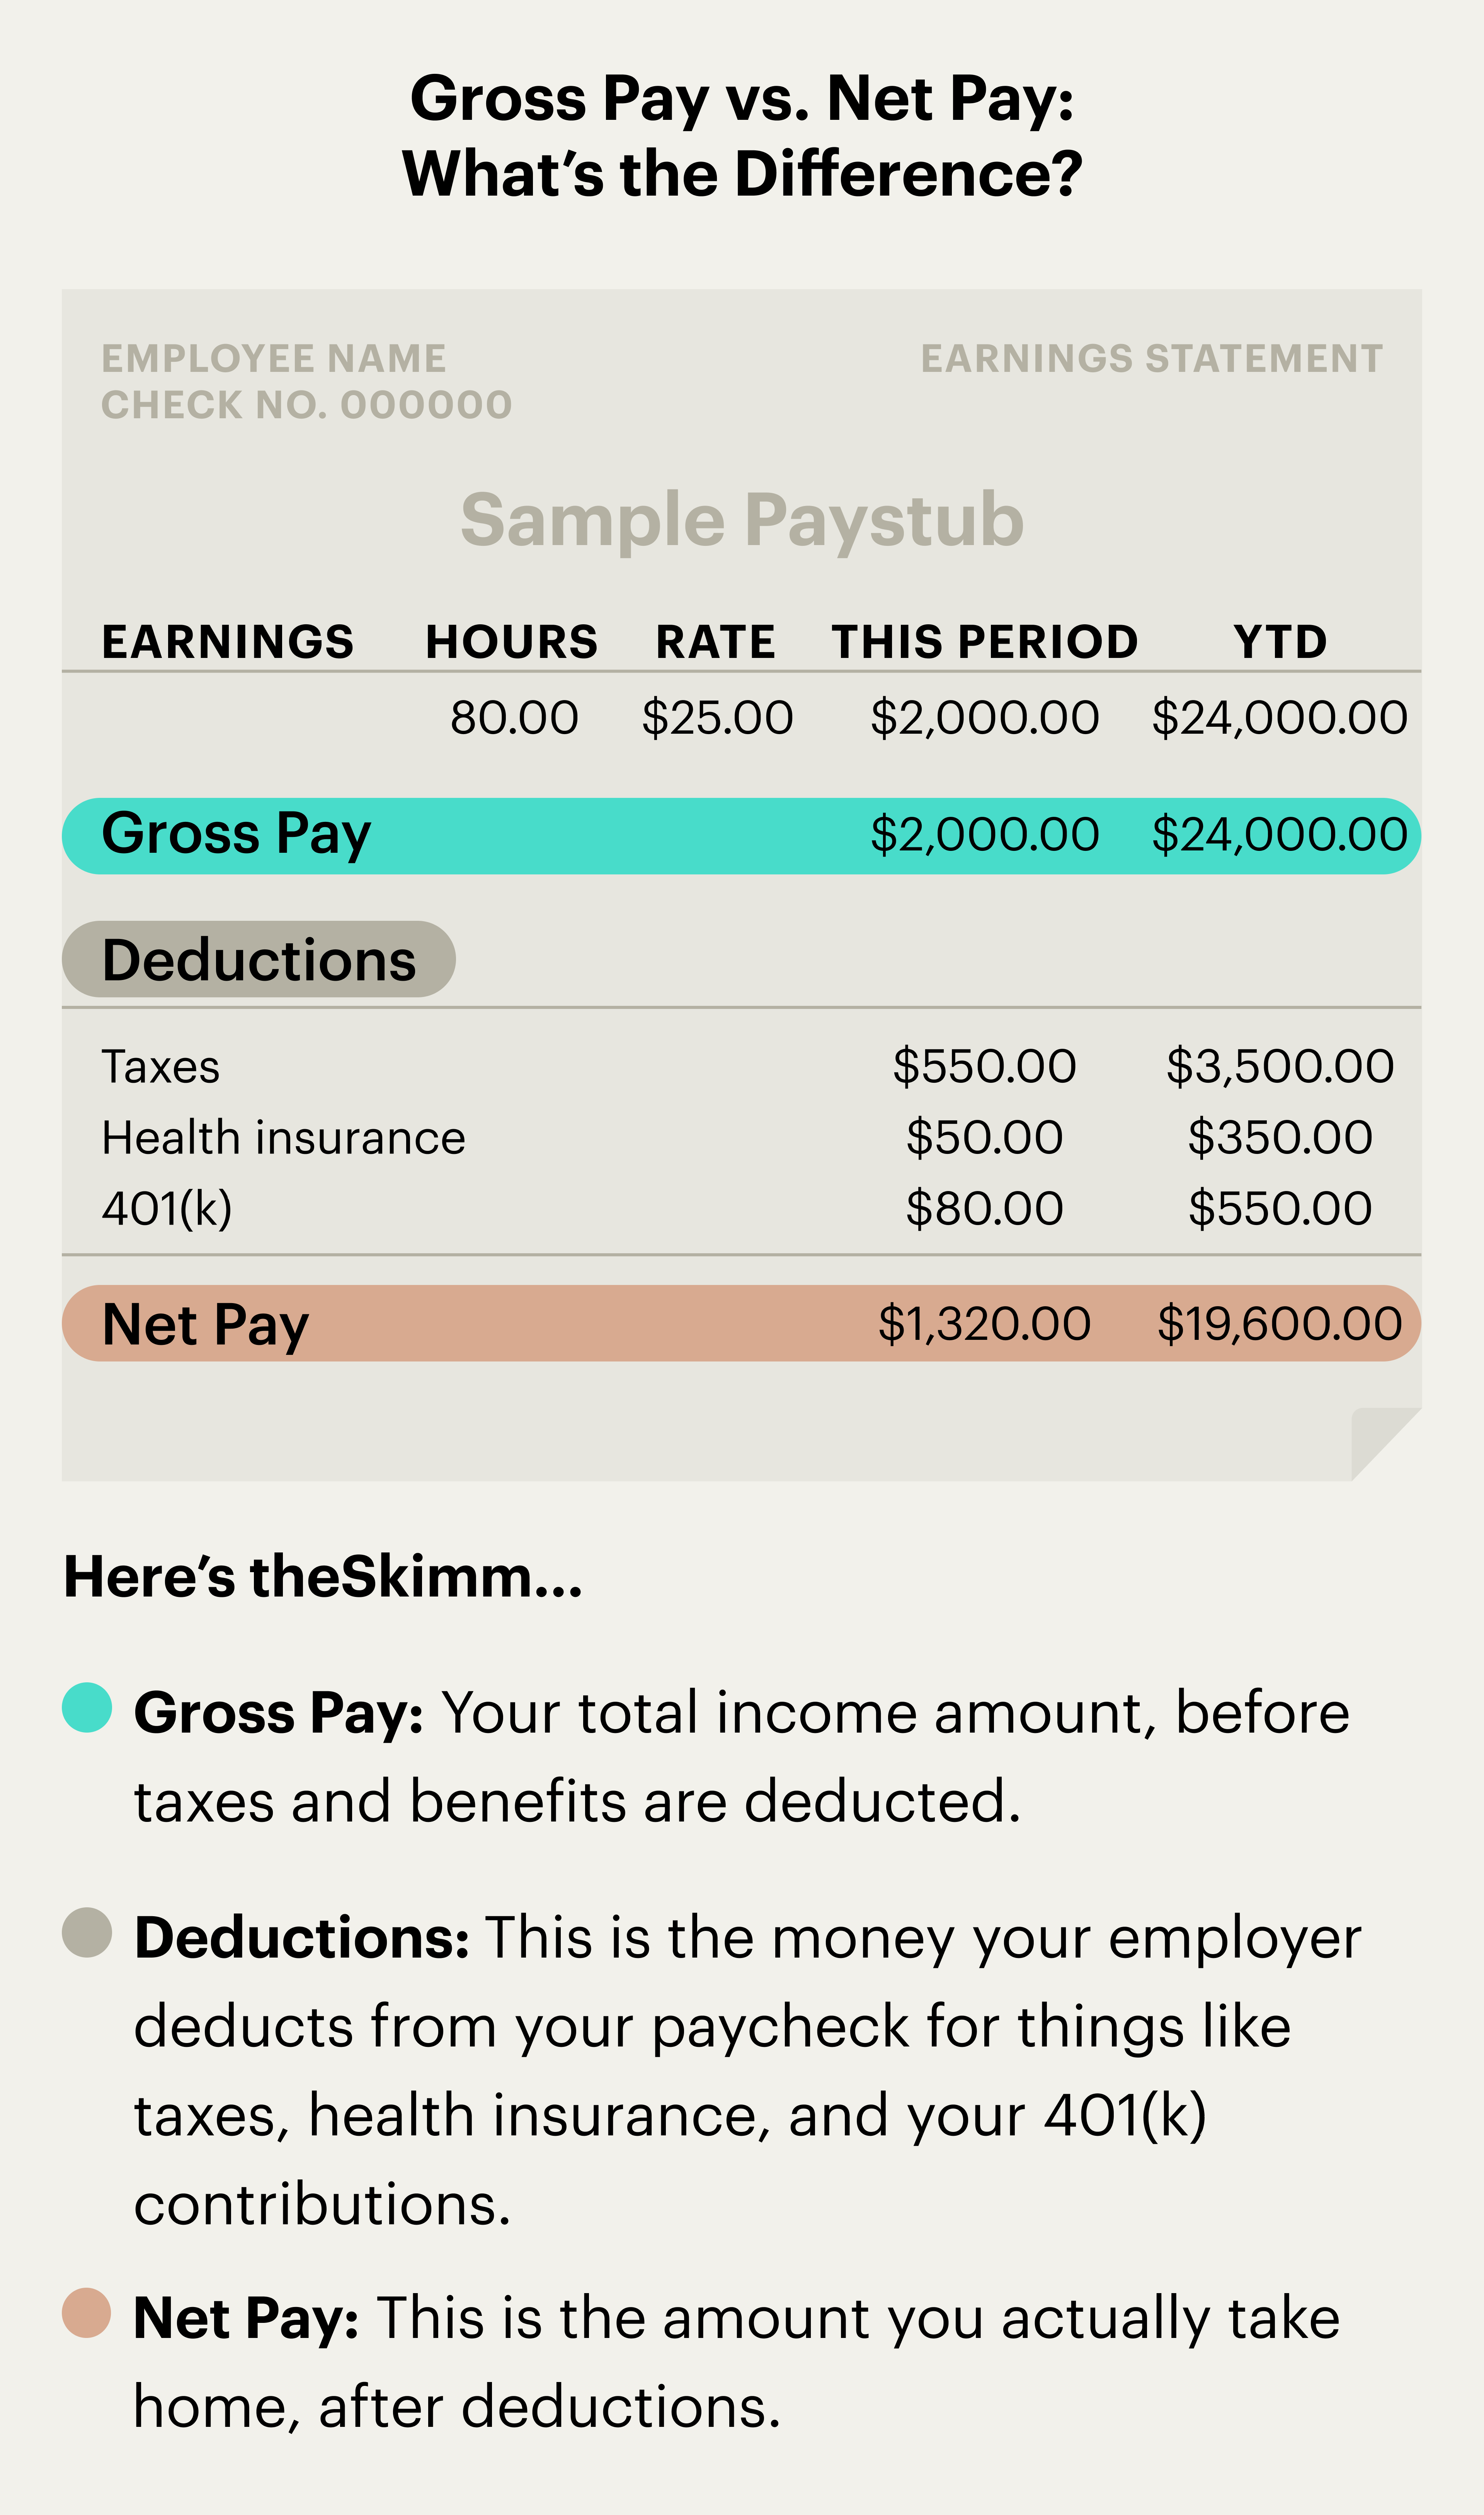 Gross Pay vs. Net Pay: What Is The Difference?